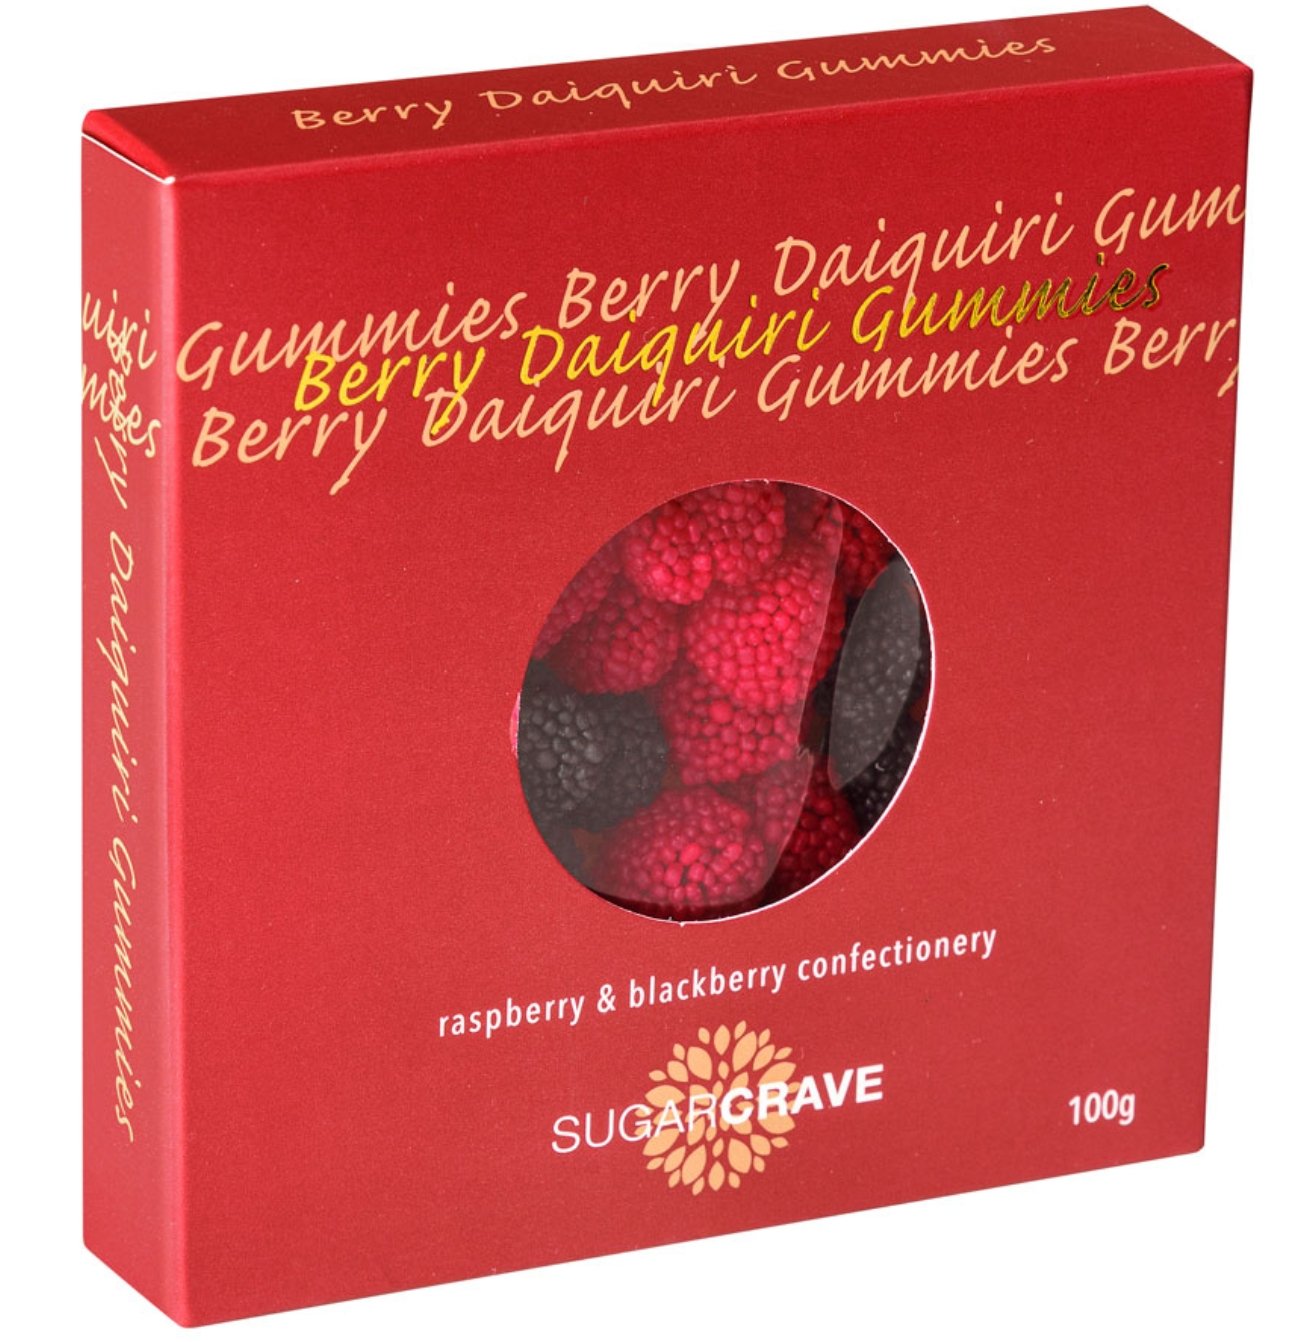 Sugarcrave Berry Daiquiri Gummies 100g - Beautiful Gifts - Packaged with Love